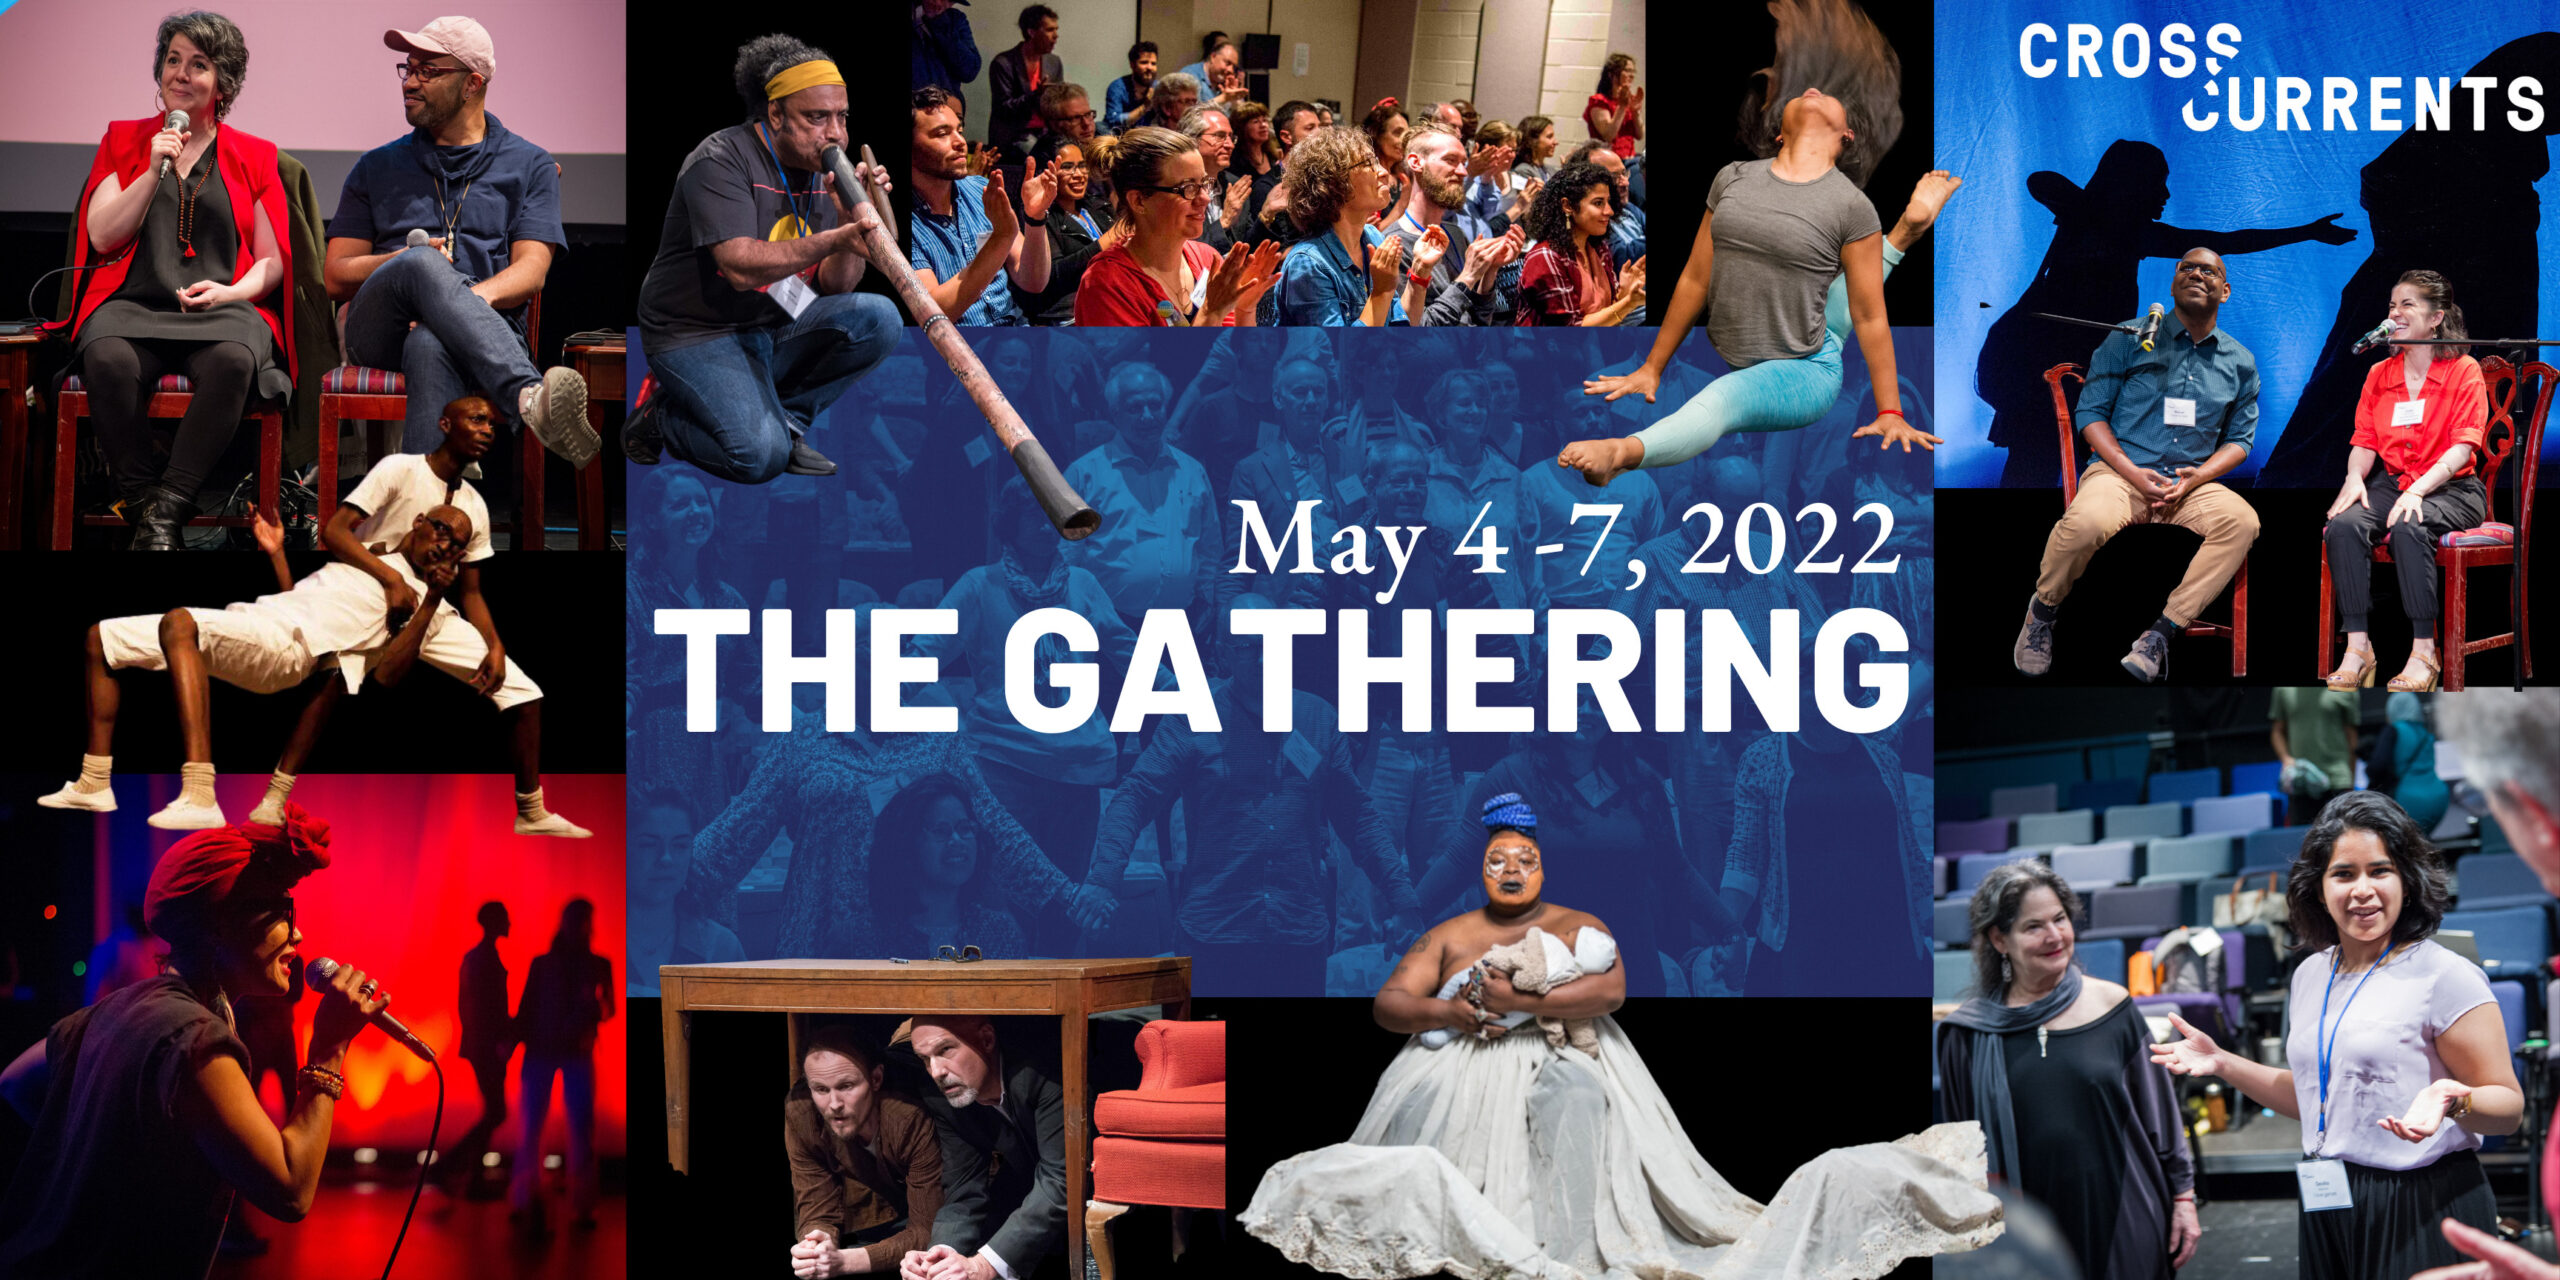 The Gathering 2022 project image collage for May 4-7, 2022